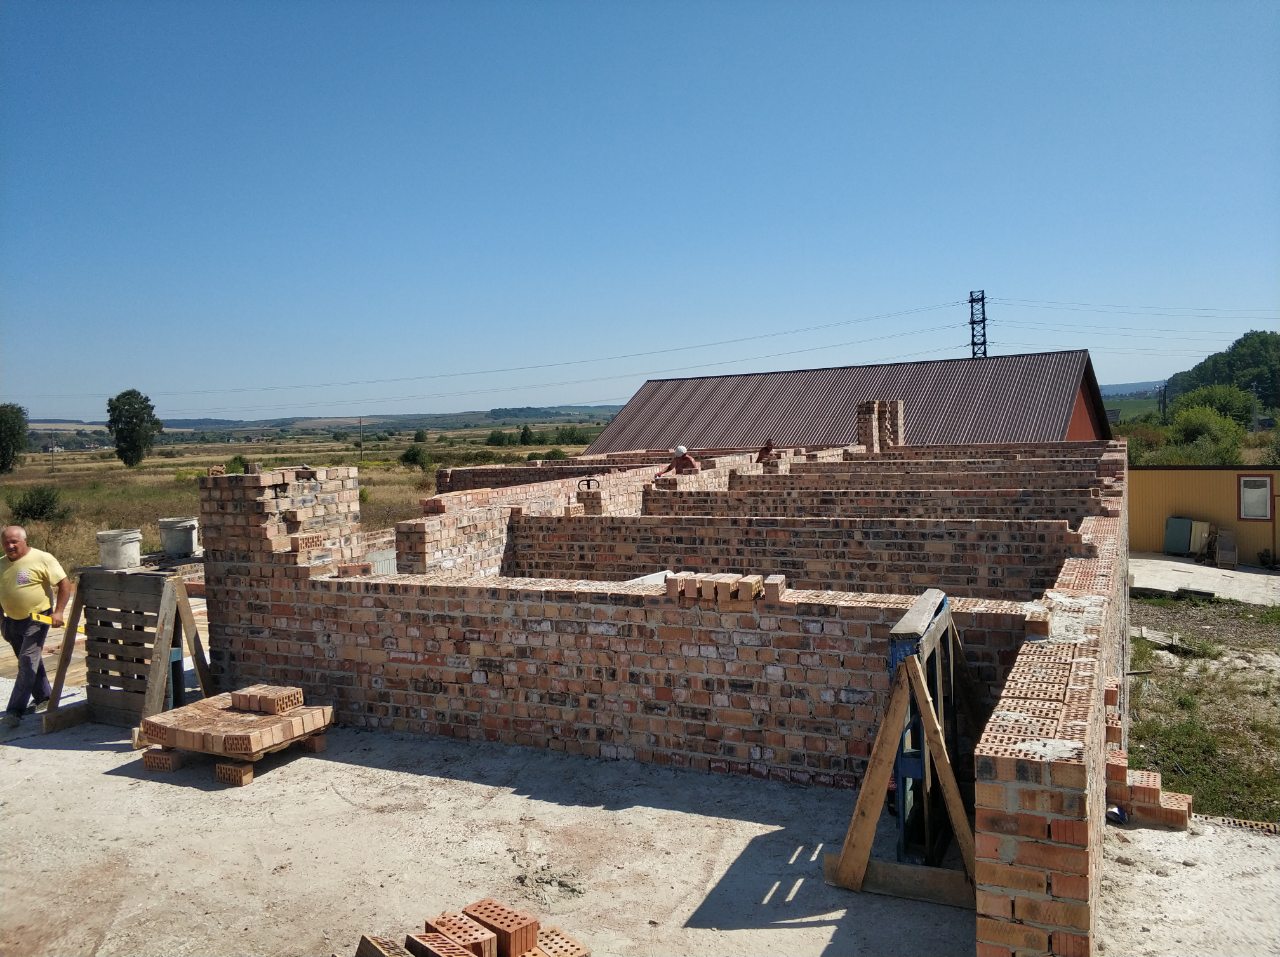 Ivano-Frankivsk Construction Update 21 August 2019 “So we built the wall…”